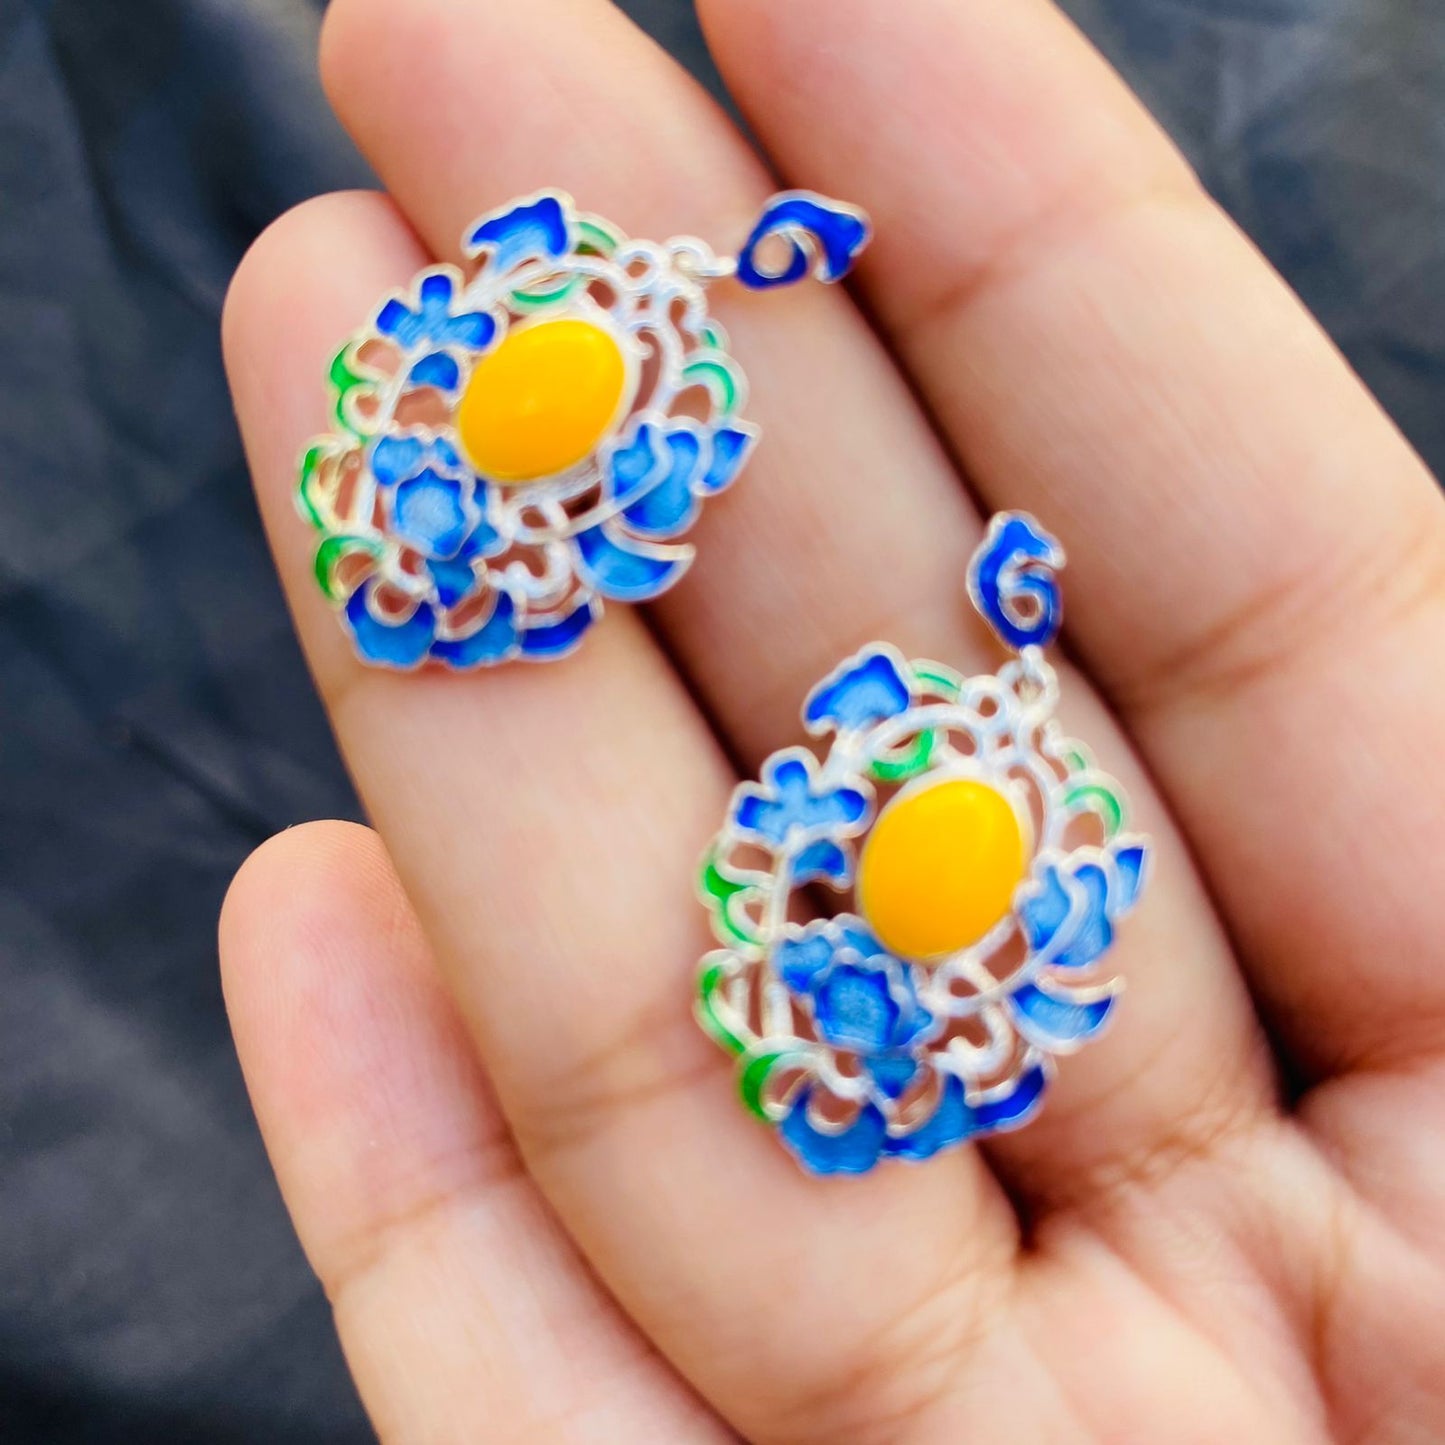 Blue and Yellow Flower Drop Earrings